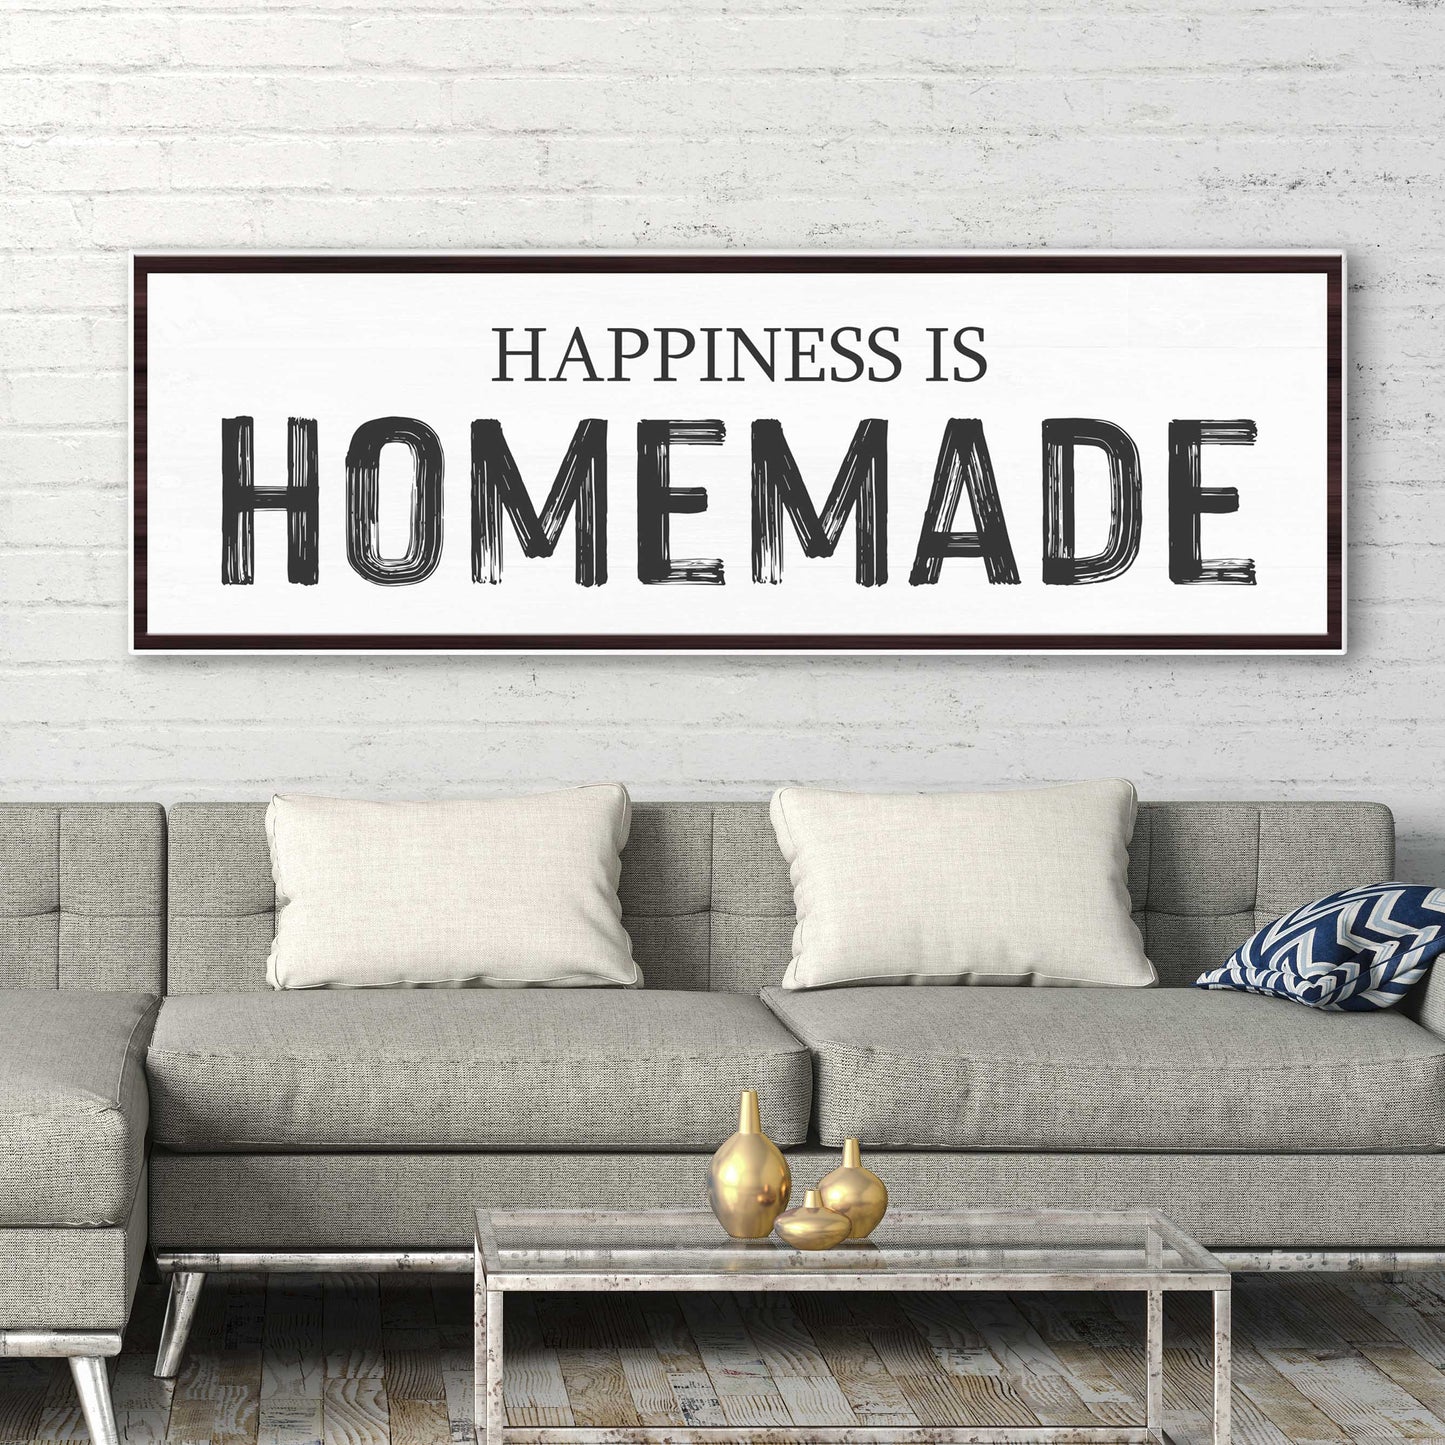 Happiness Is Homemade Sign - Image by Tailored Canvases